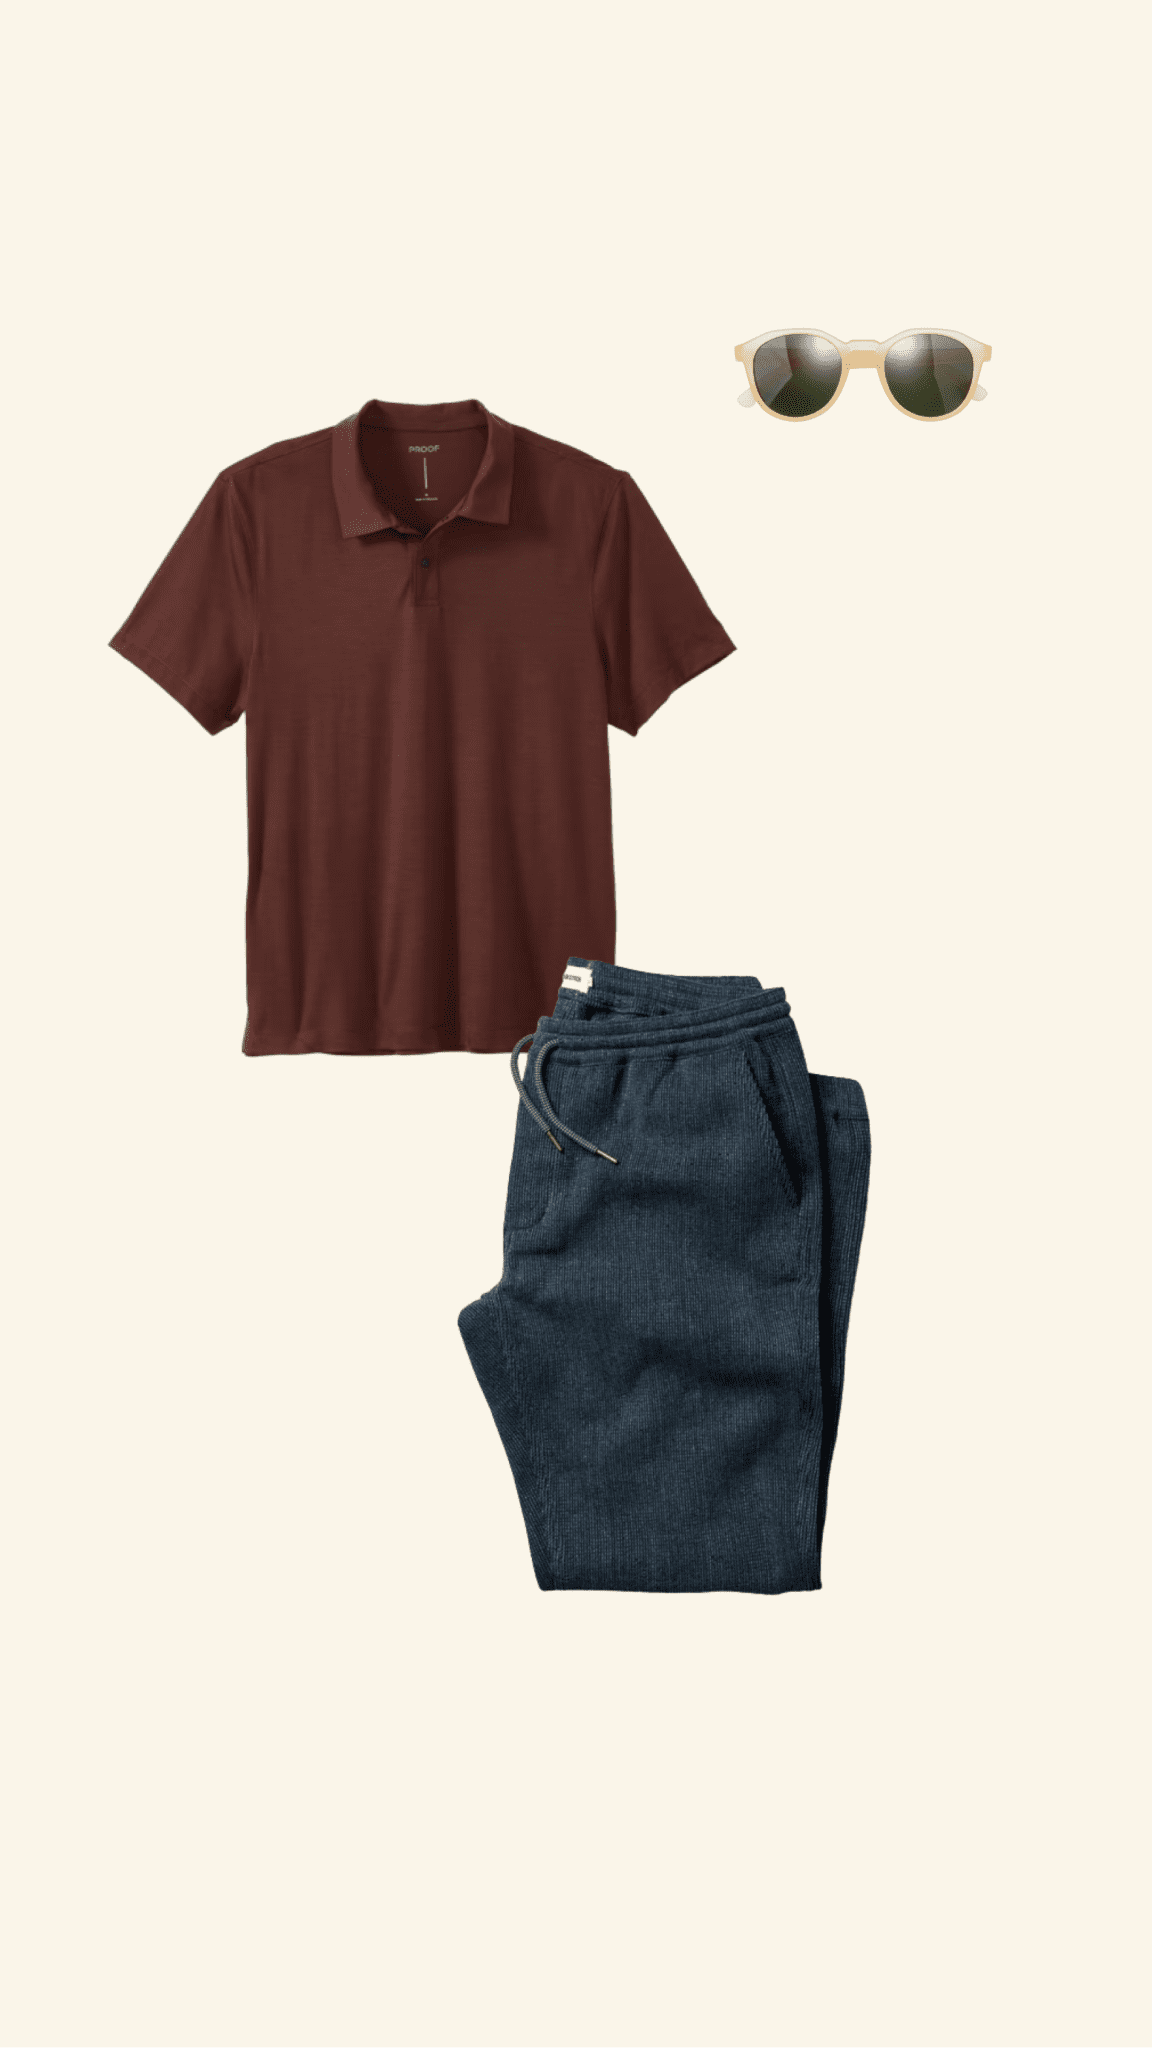 Collage of plum polo shirt, blue slacks, and sunglasses
outfit pieces from Huckberry